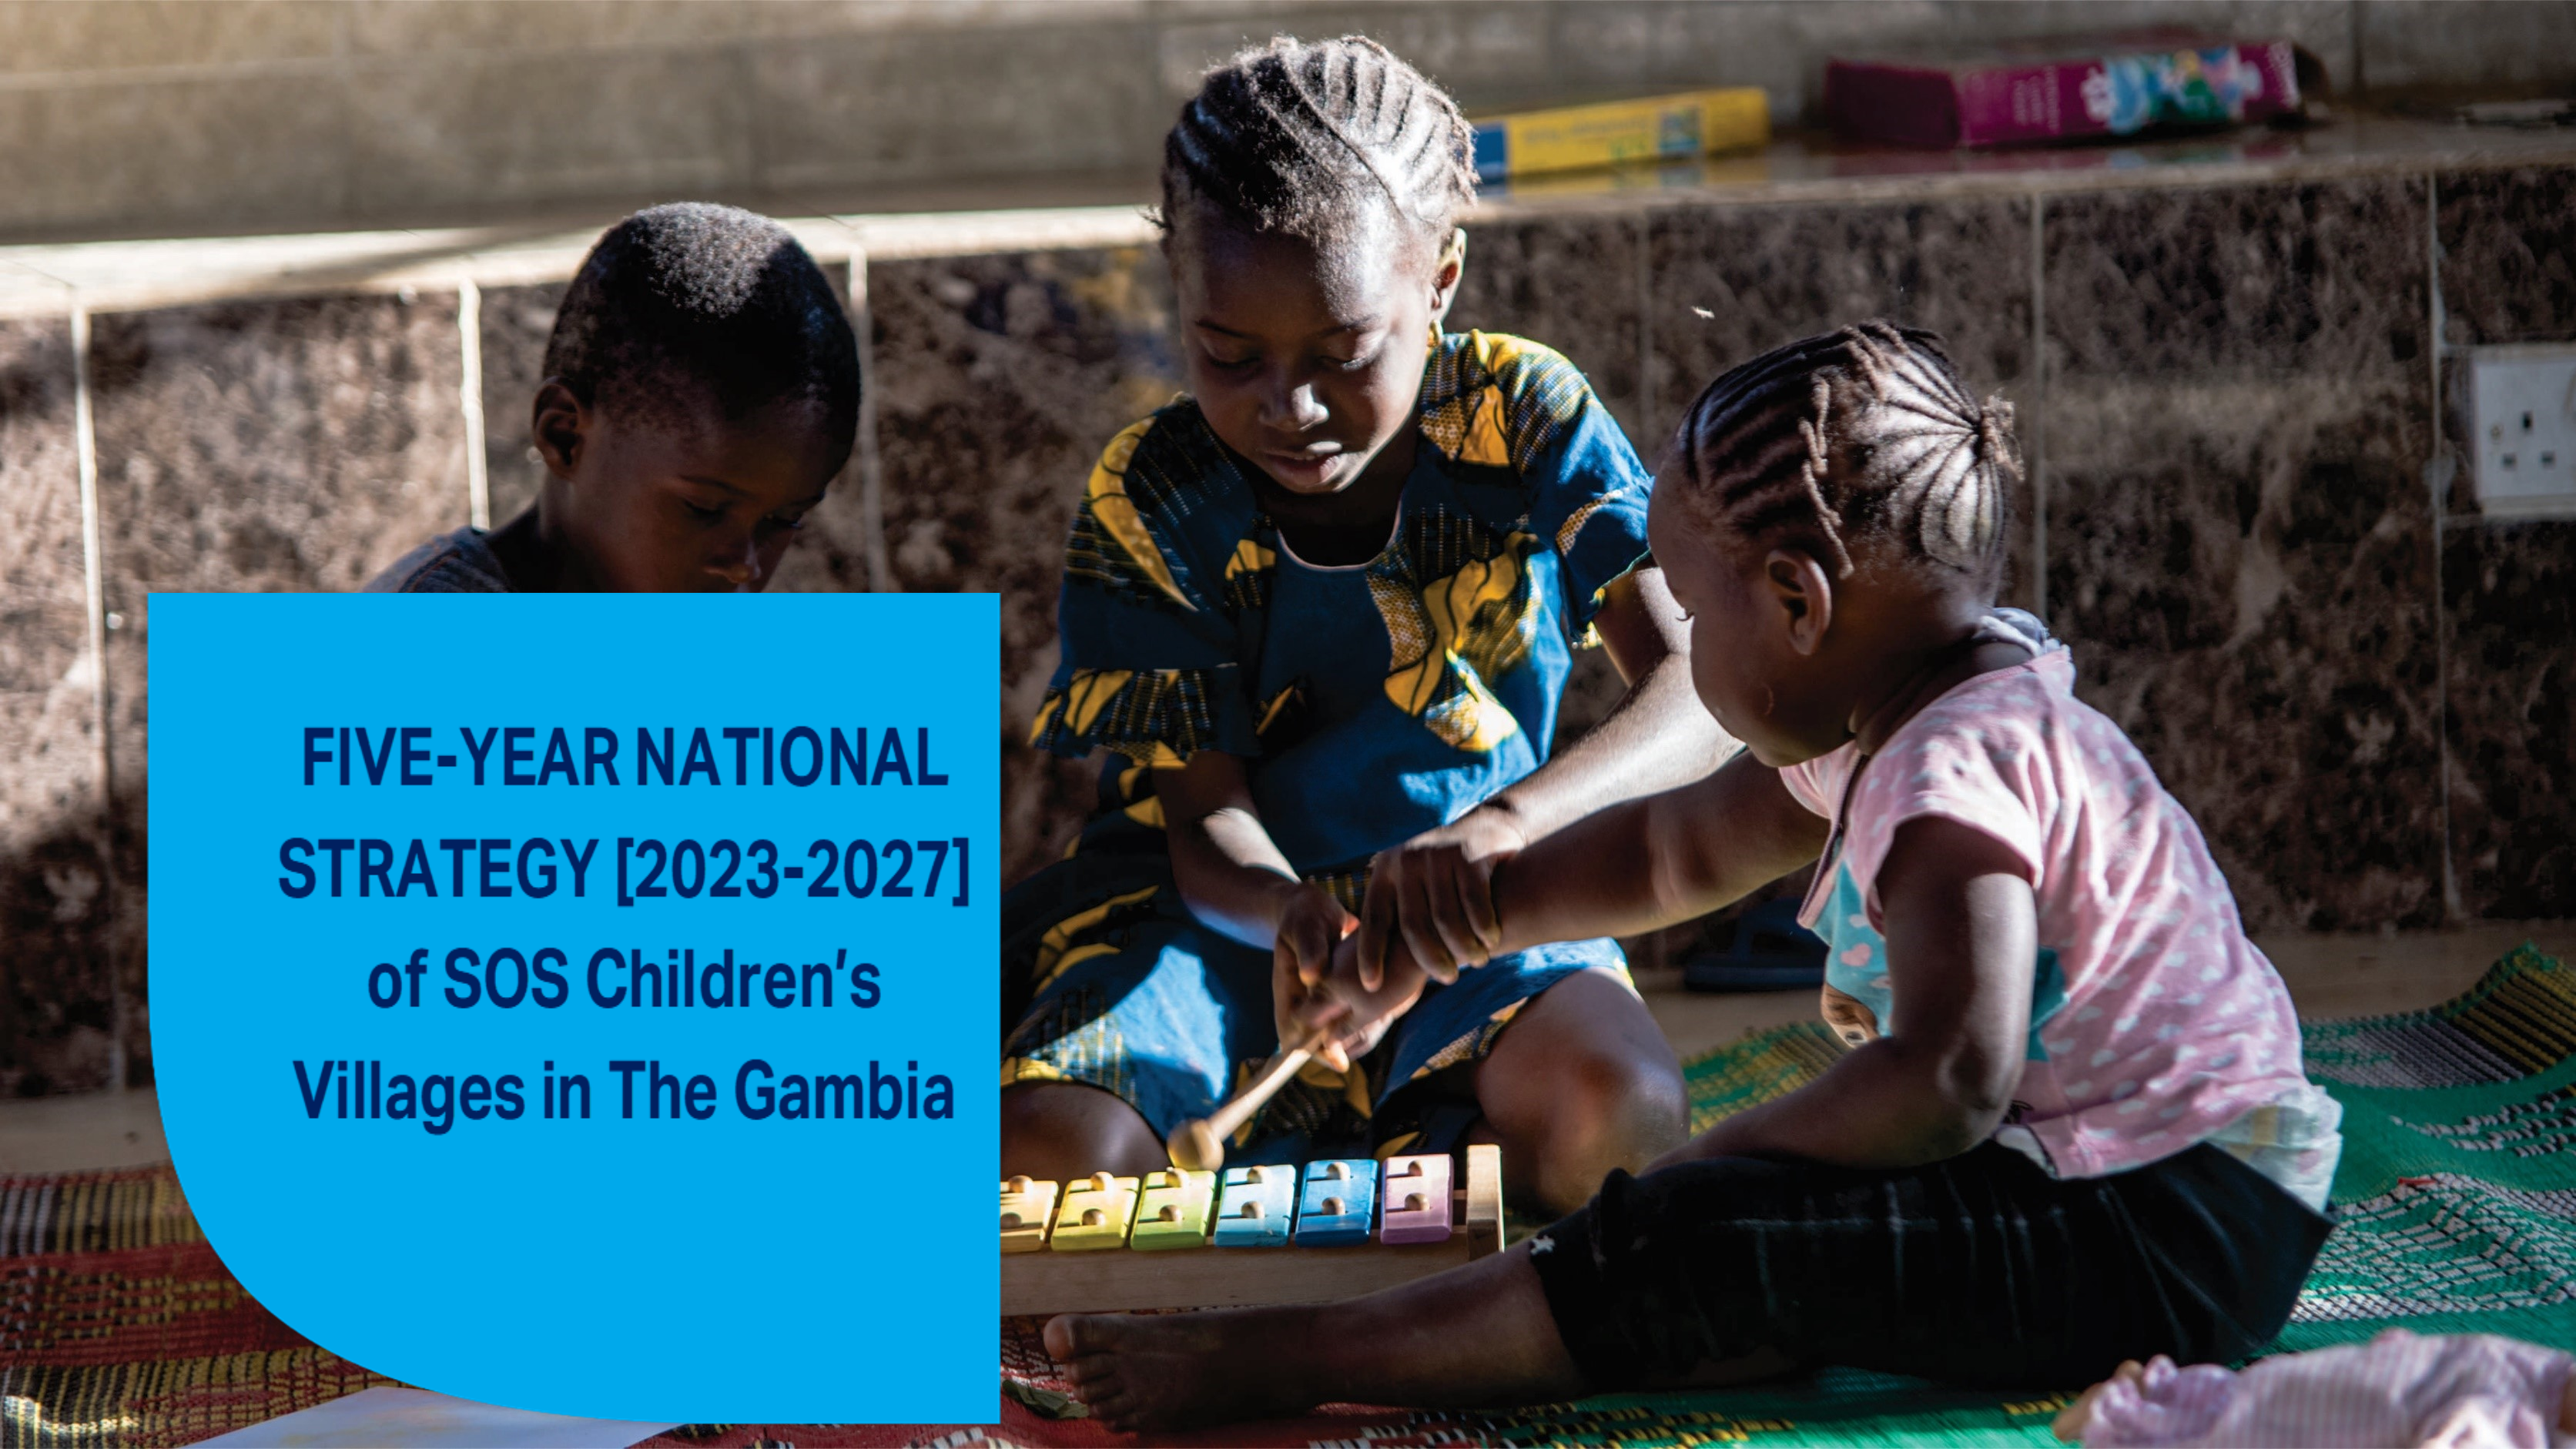 SOS Children’s Villages in The Gambia Five Years Strategy Summary Document 2023-2027